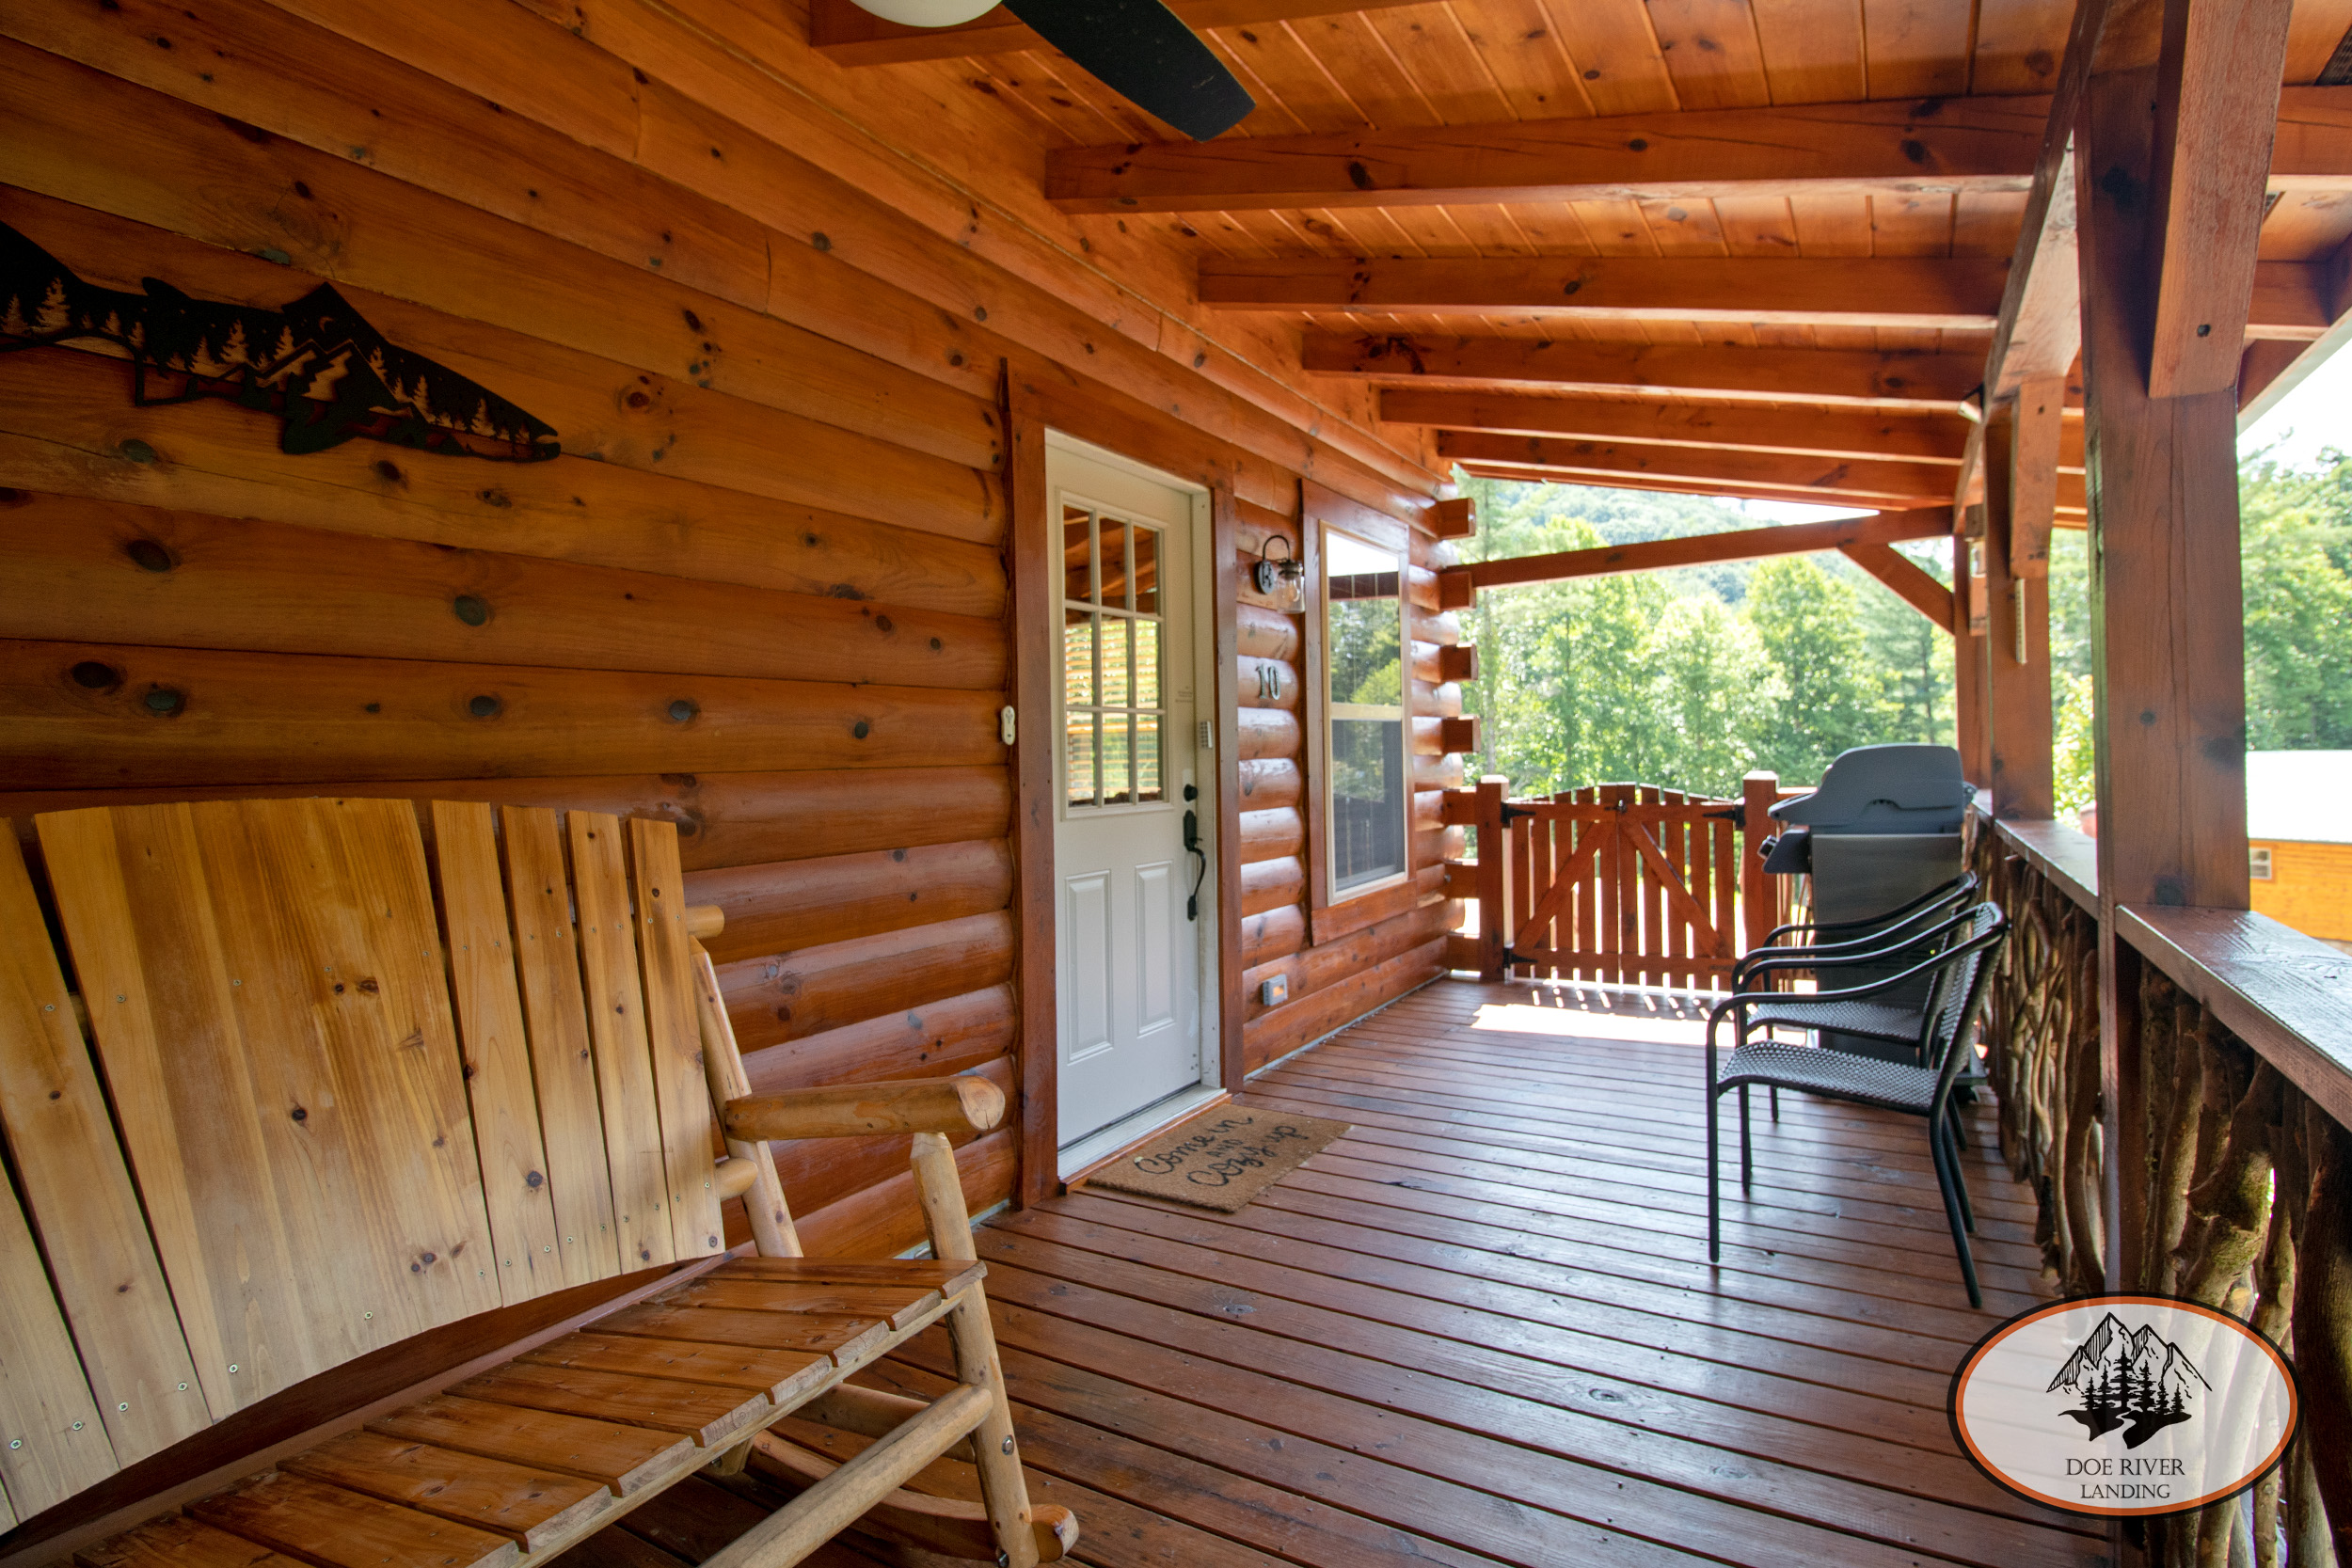 Doe River Landing campground in Roan Mountain, TN. Best vacation rental near Elizabethton, TN and Johnson City TN. Big Bear Cabin luxury cabin rental features a large porch, grill, private picnic area with umbrella, hot tub, and an amazing view of Roan Mountain forest.